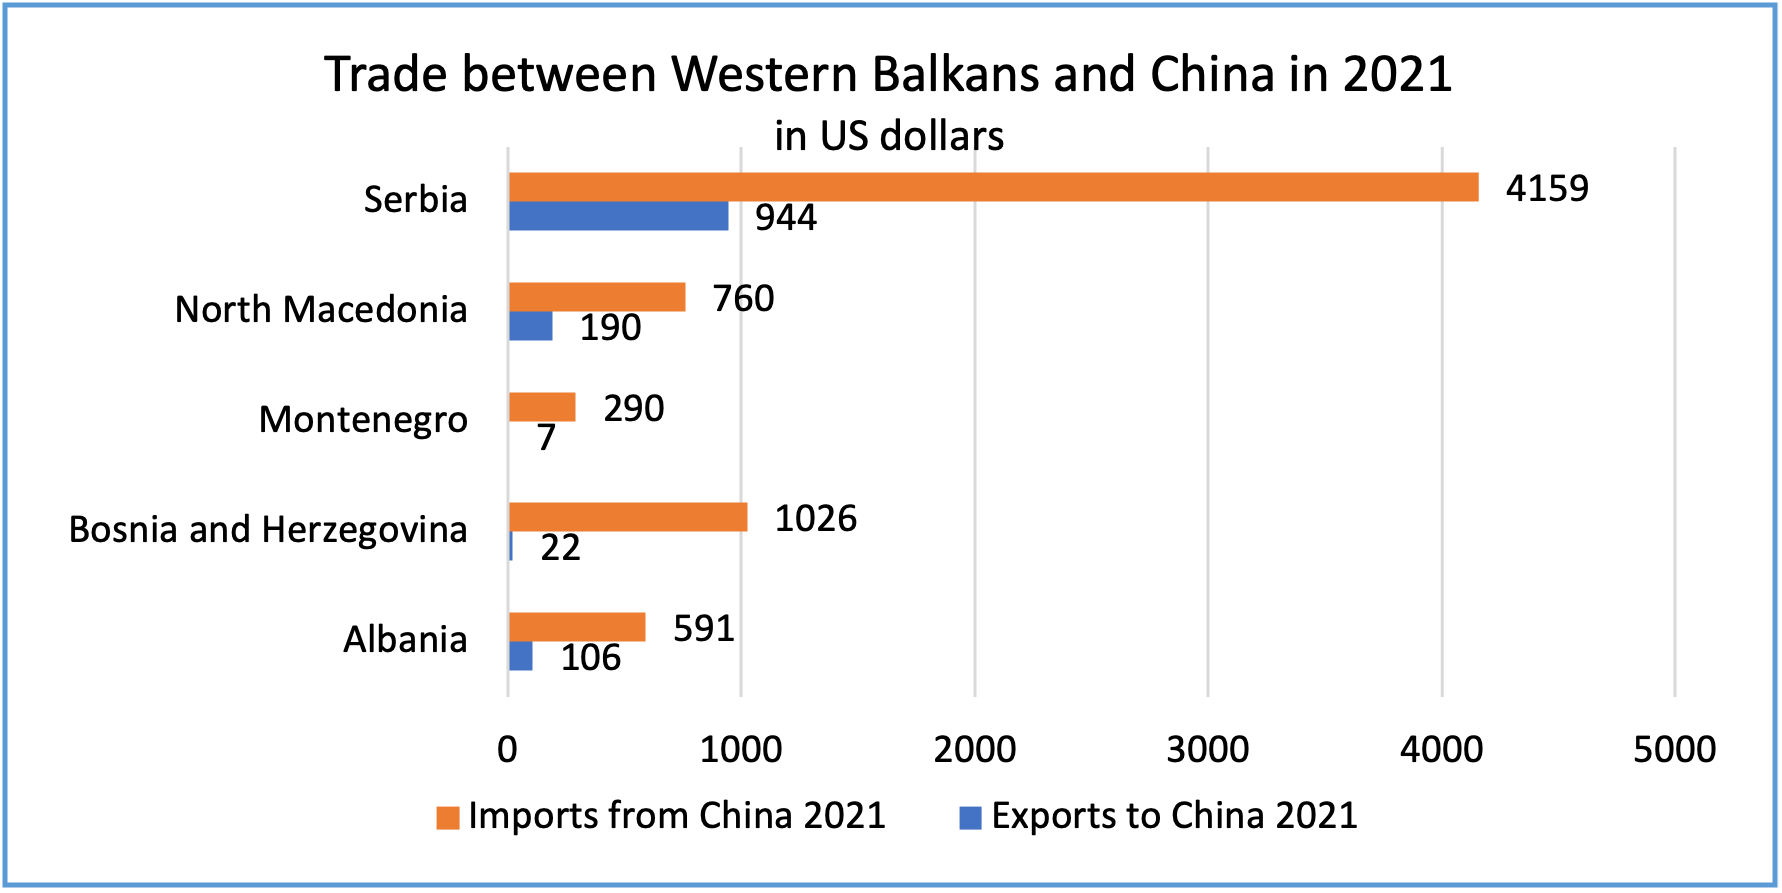 Trade levels between China and Western Balkans 2021 in million US dollars